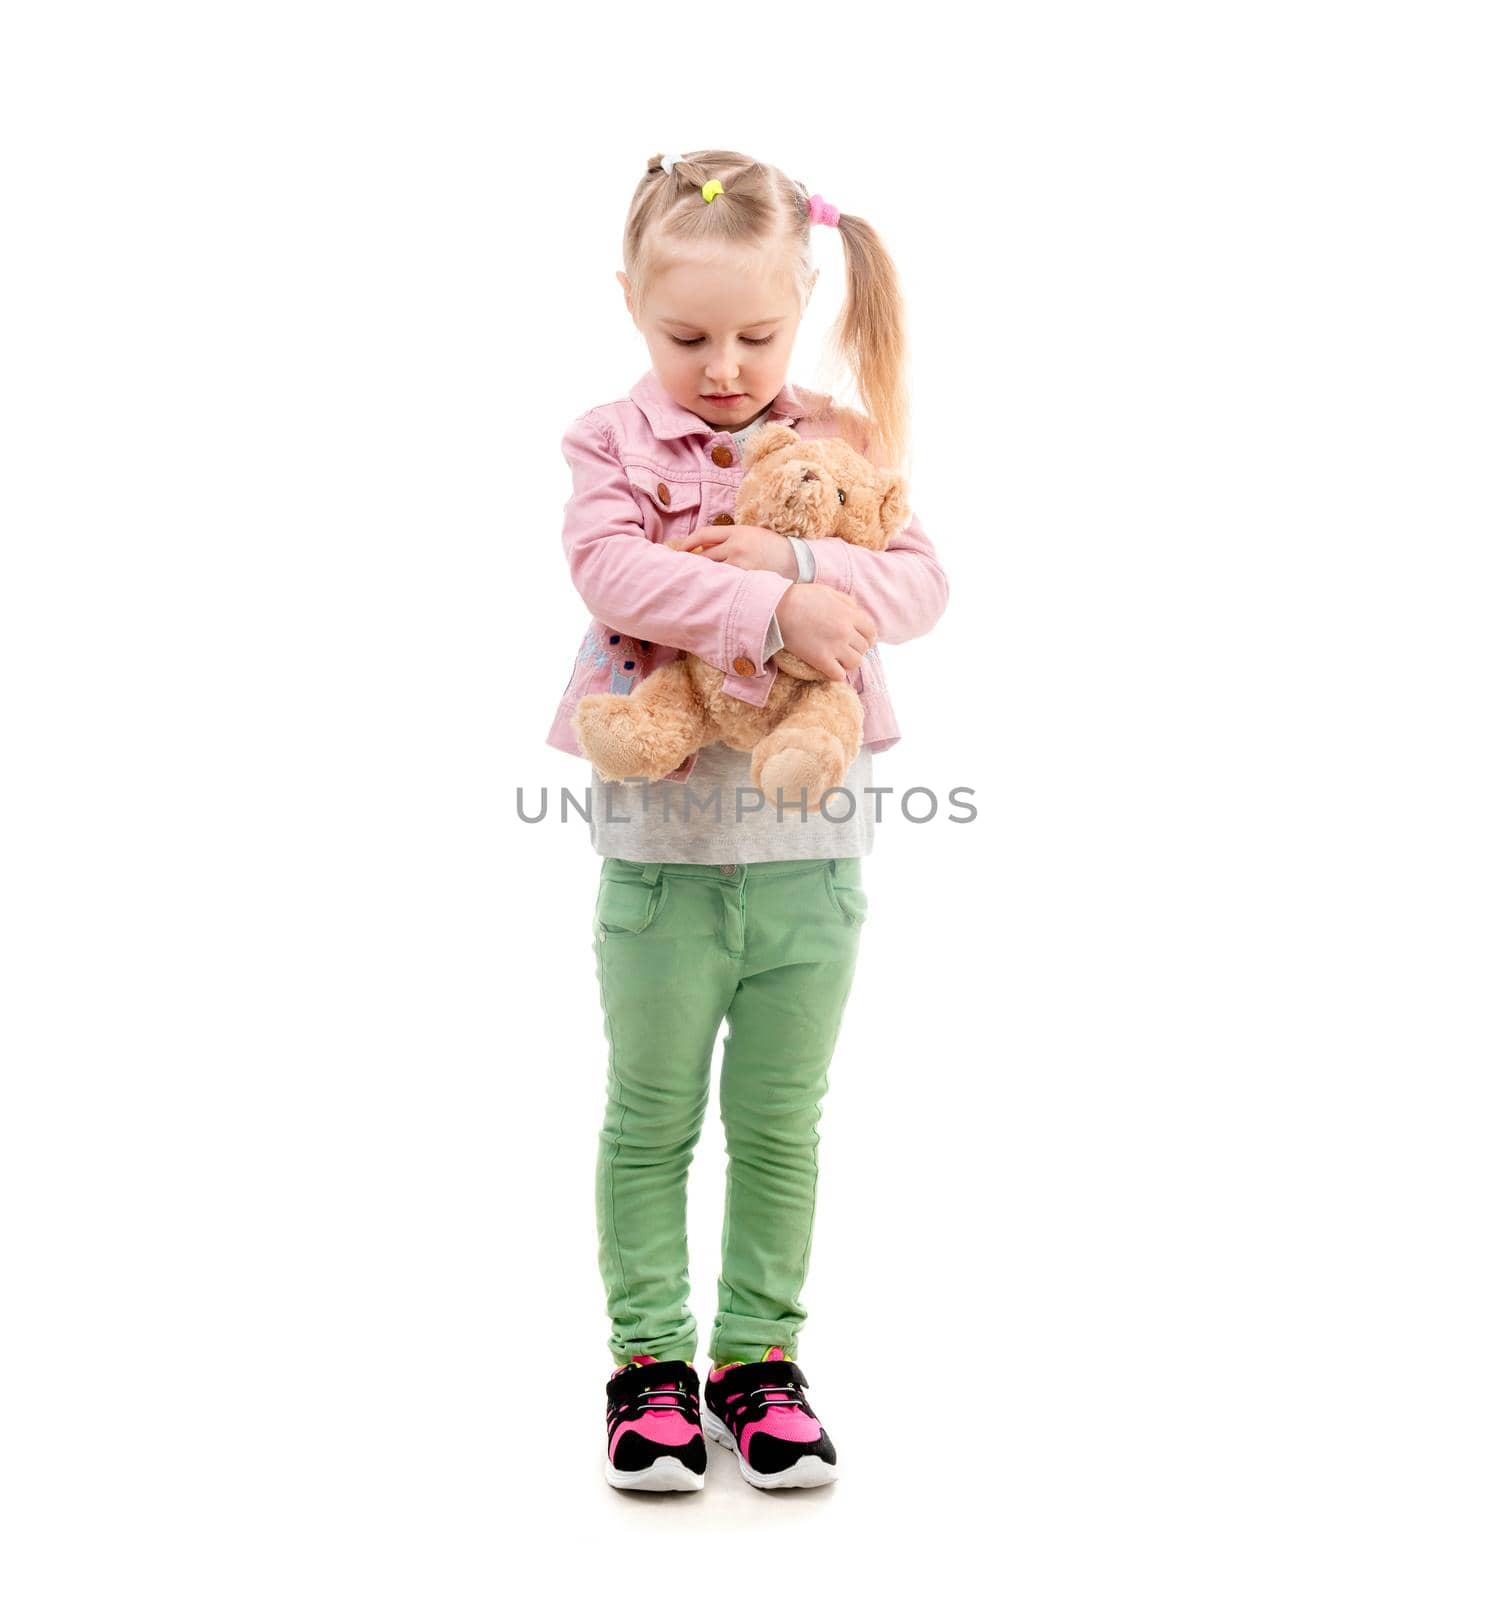 Lovely girl hugging toy, isolated on white background by tan4ikk1